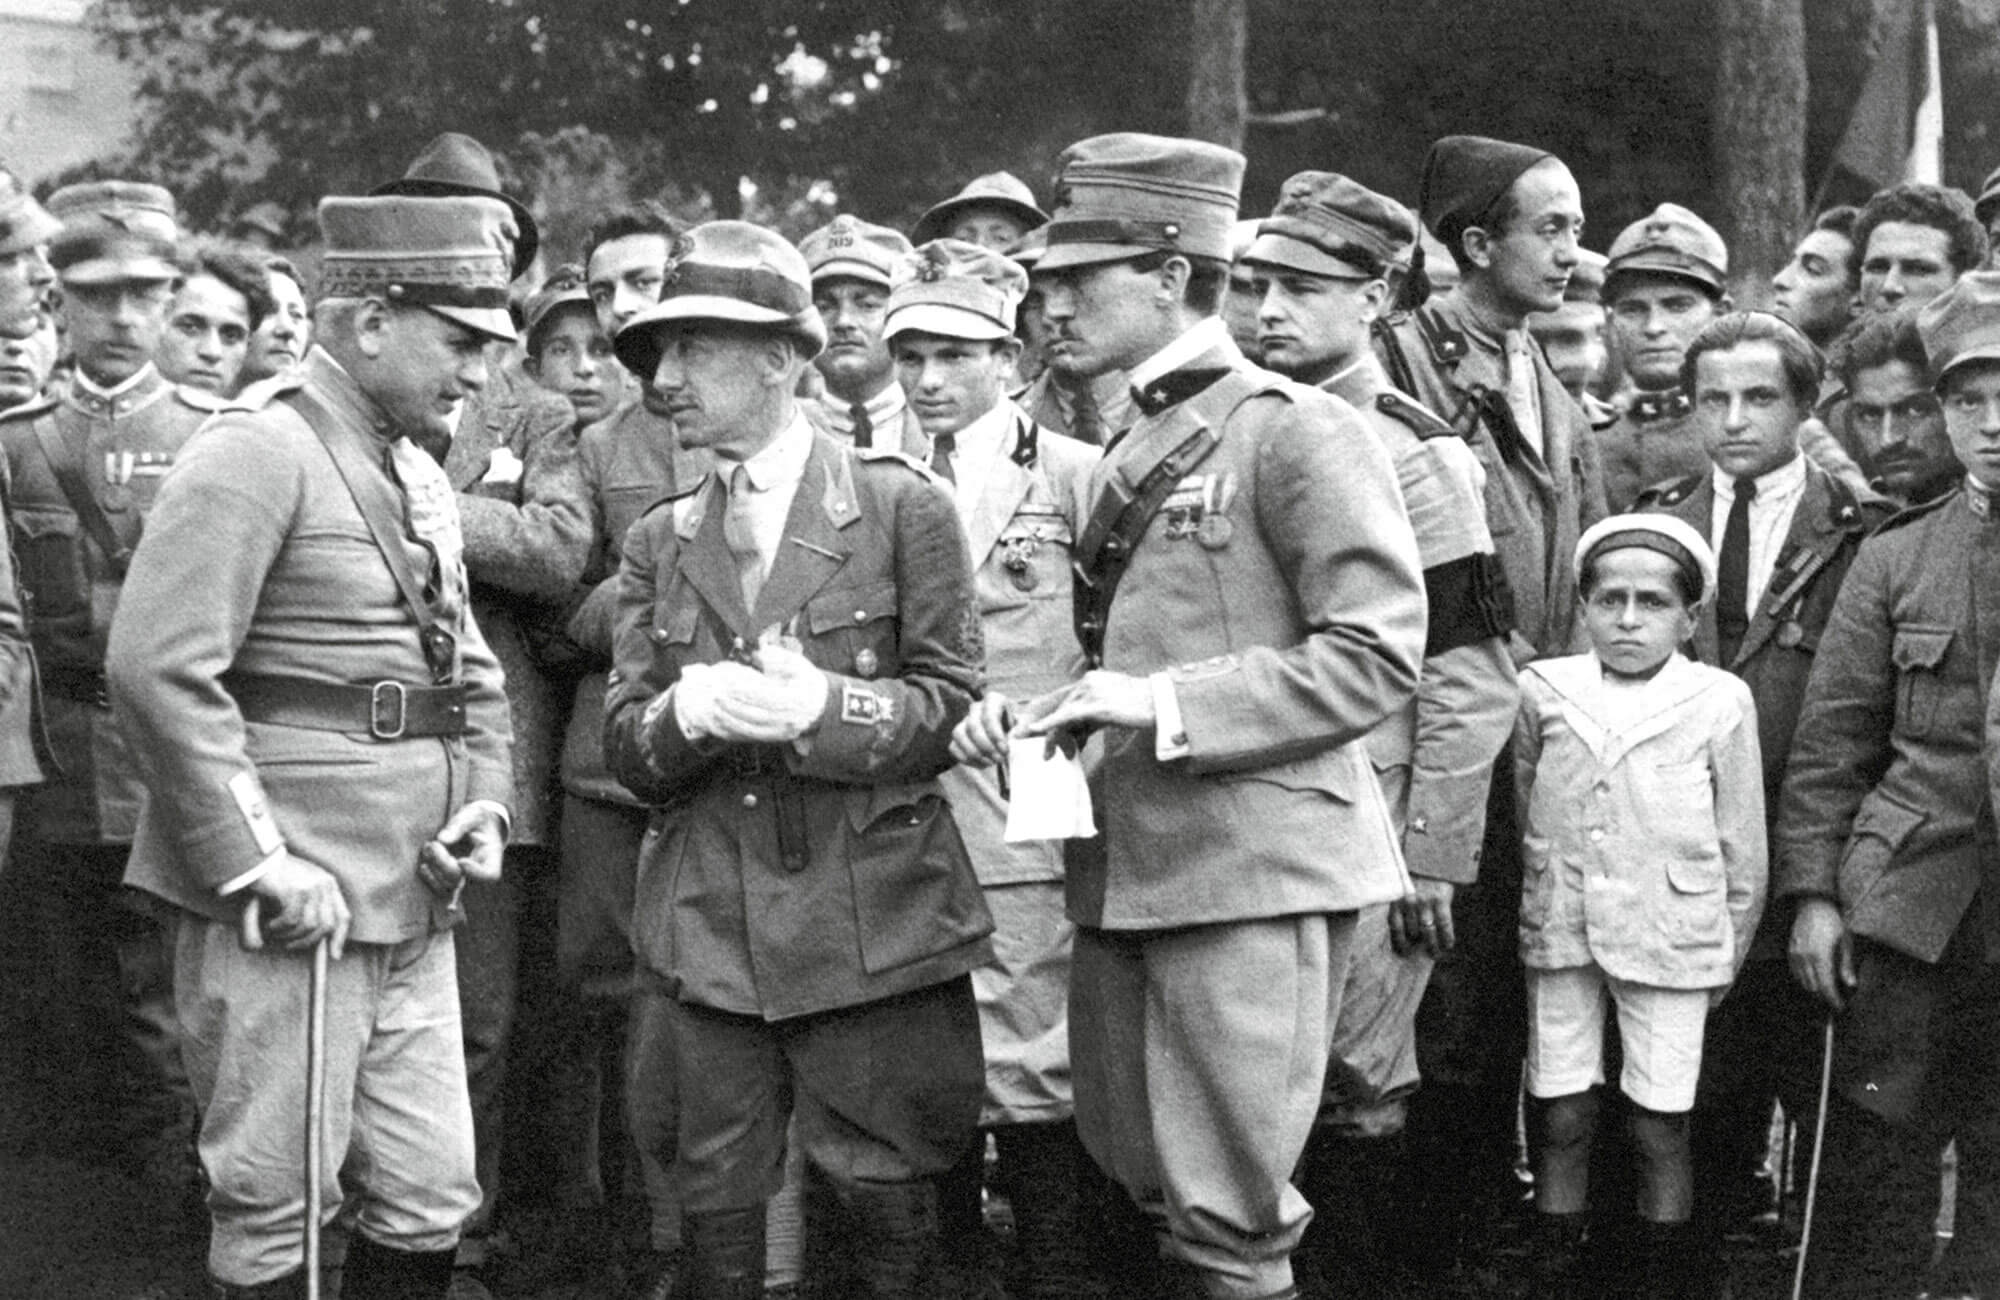 D’Annunzio conferring with two of his military commanders, 30 May 1920.